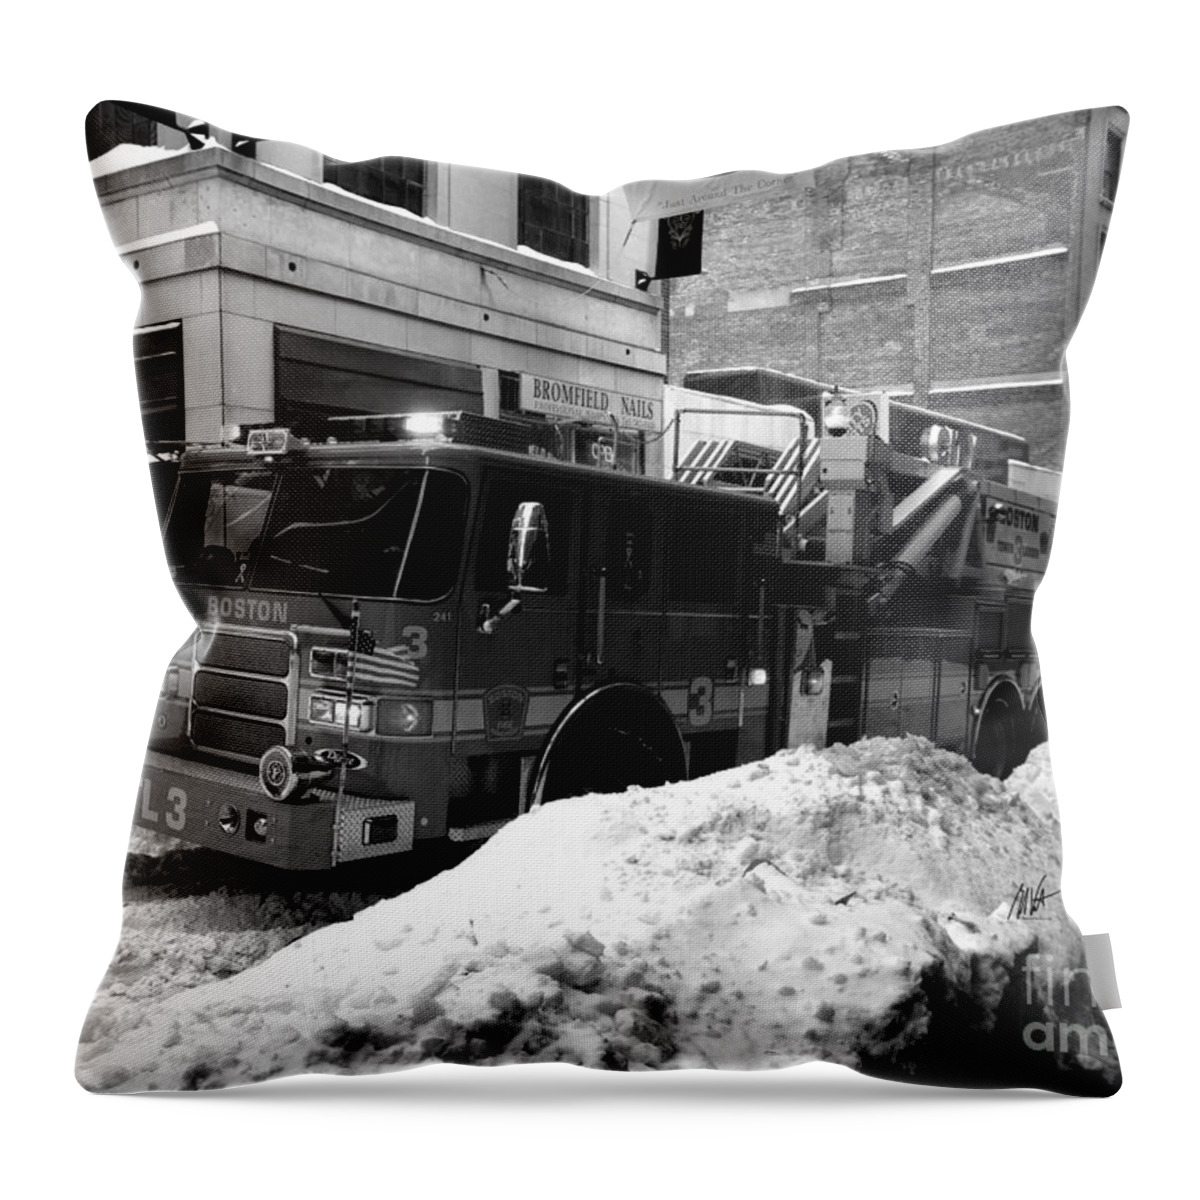 Boston Throw Pillow featuring the photograph Boston - Fire Engine 3 by Mark Valentine